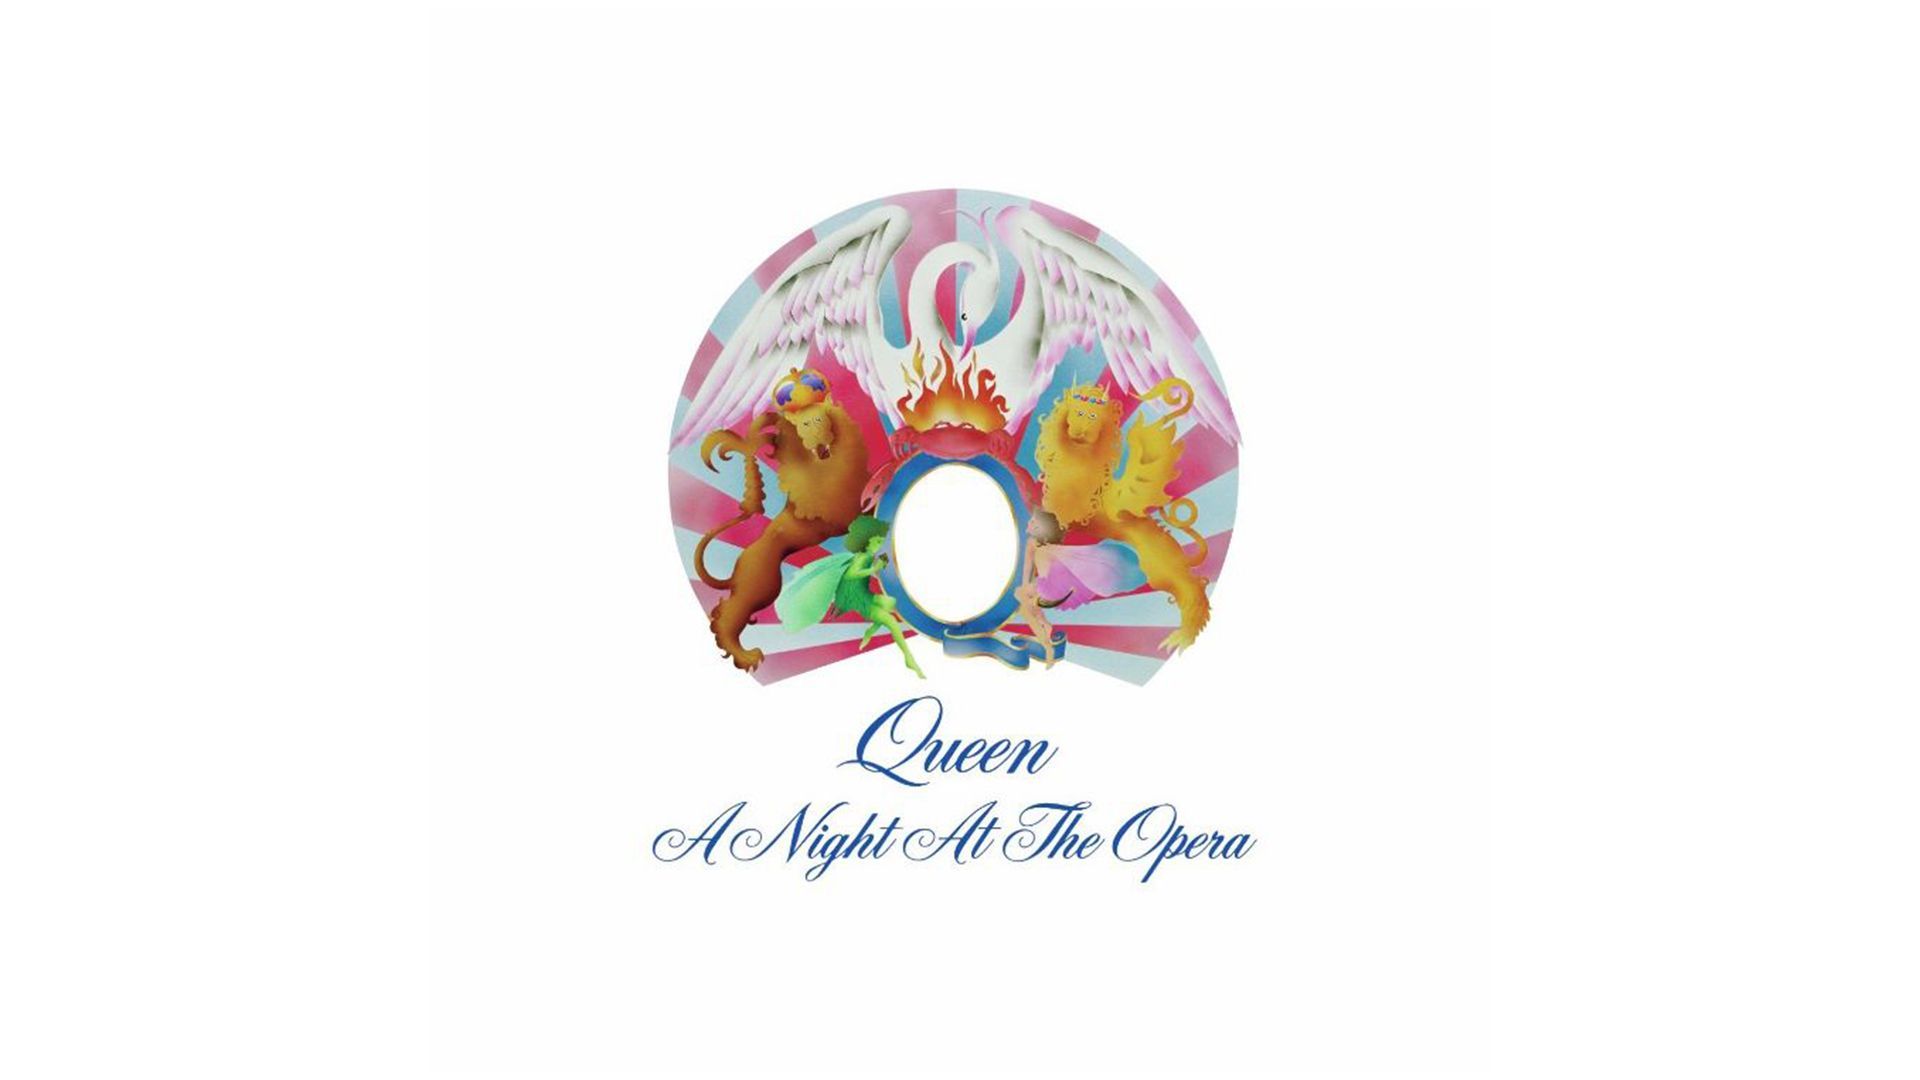 Queen – A Night at the Opera